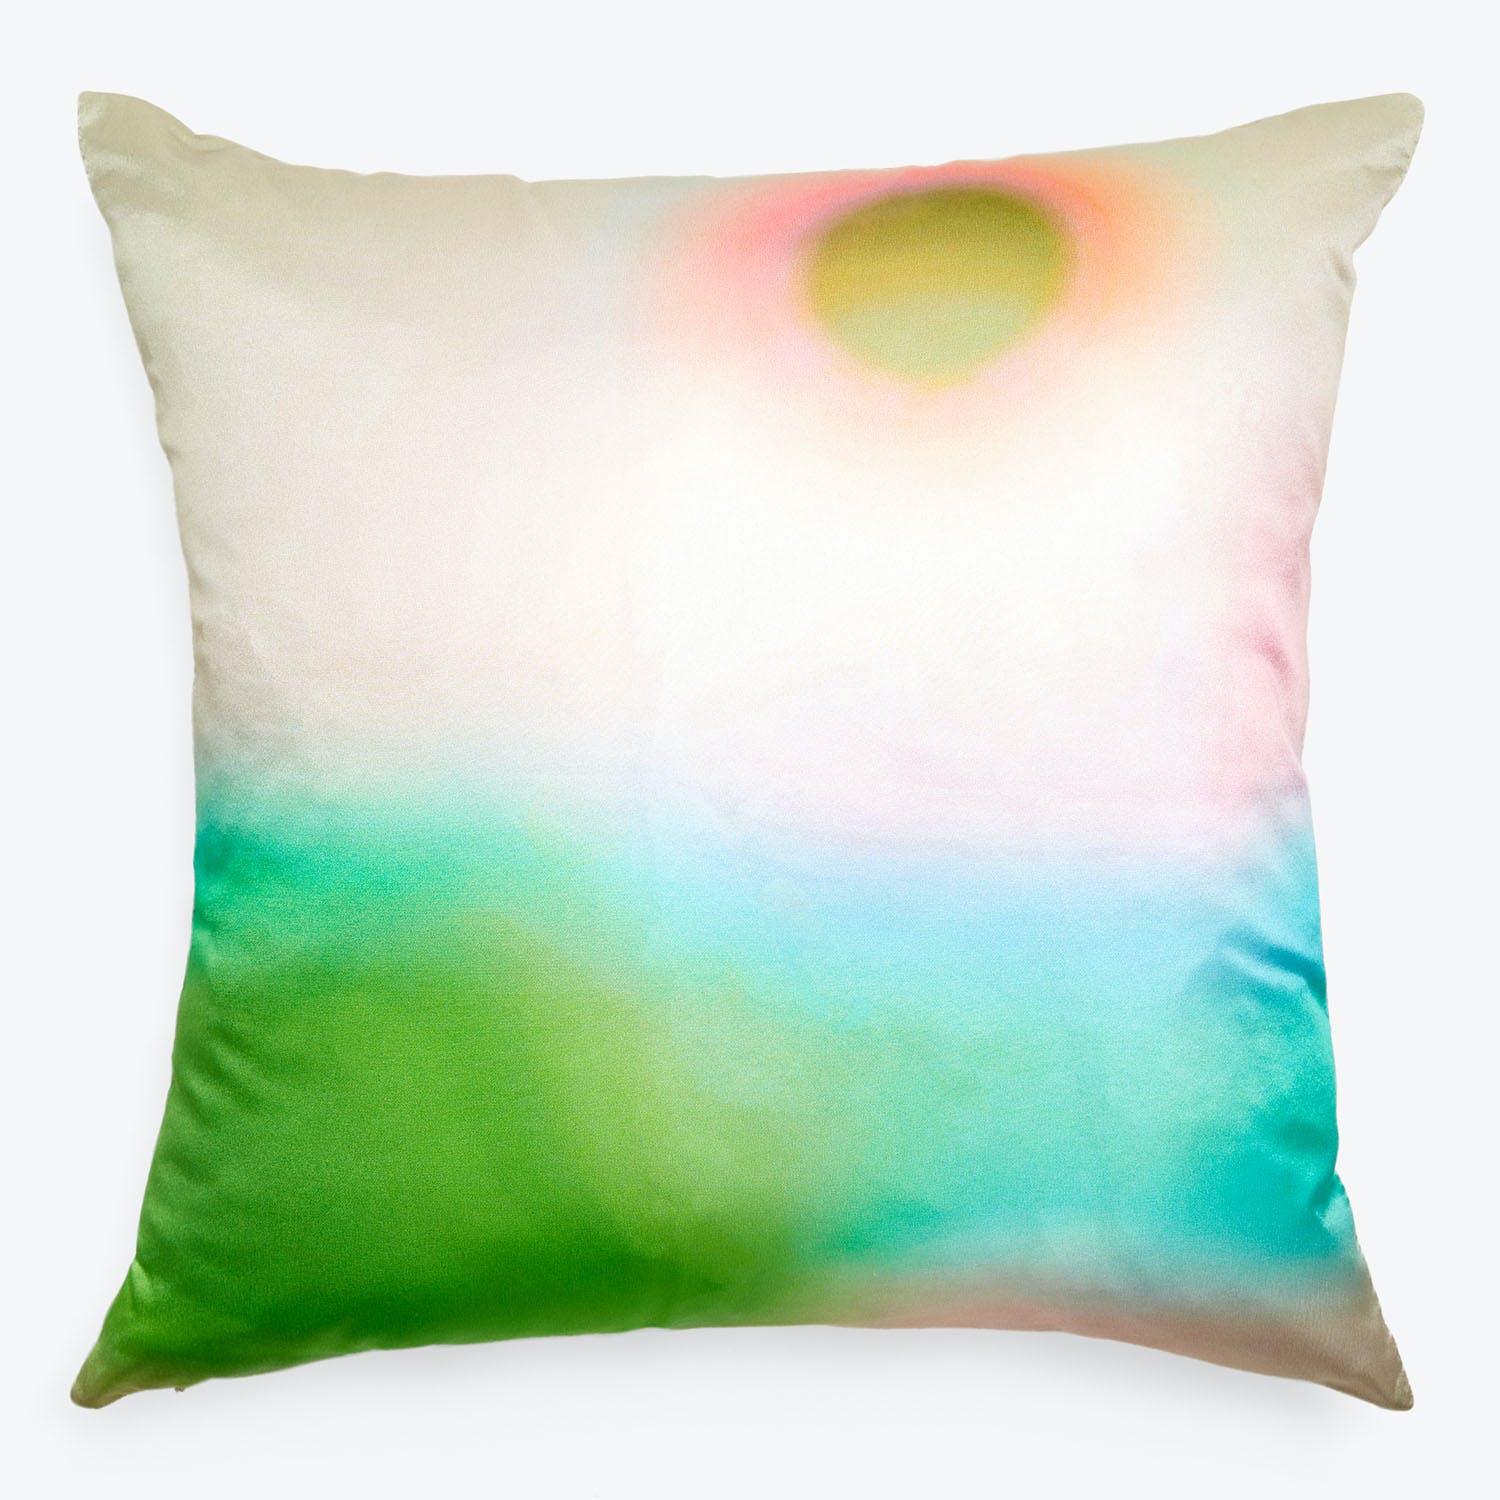 Colorful watercolor-style square pillow with a vibrant gradient design.